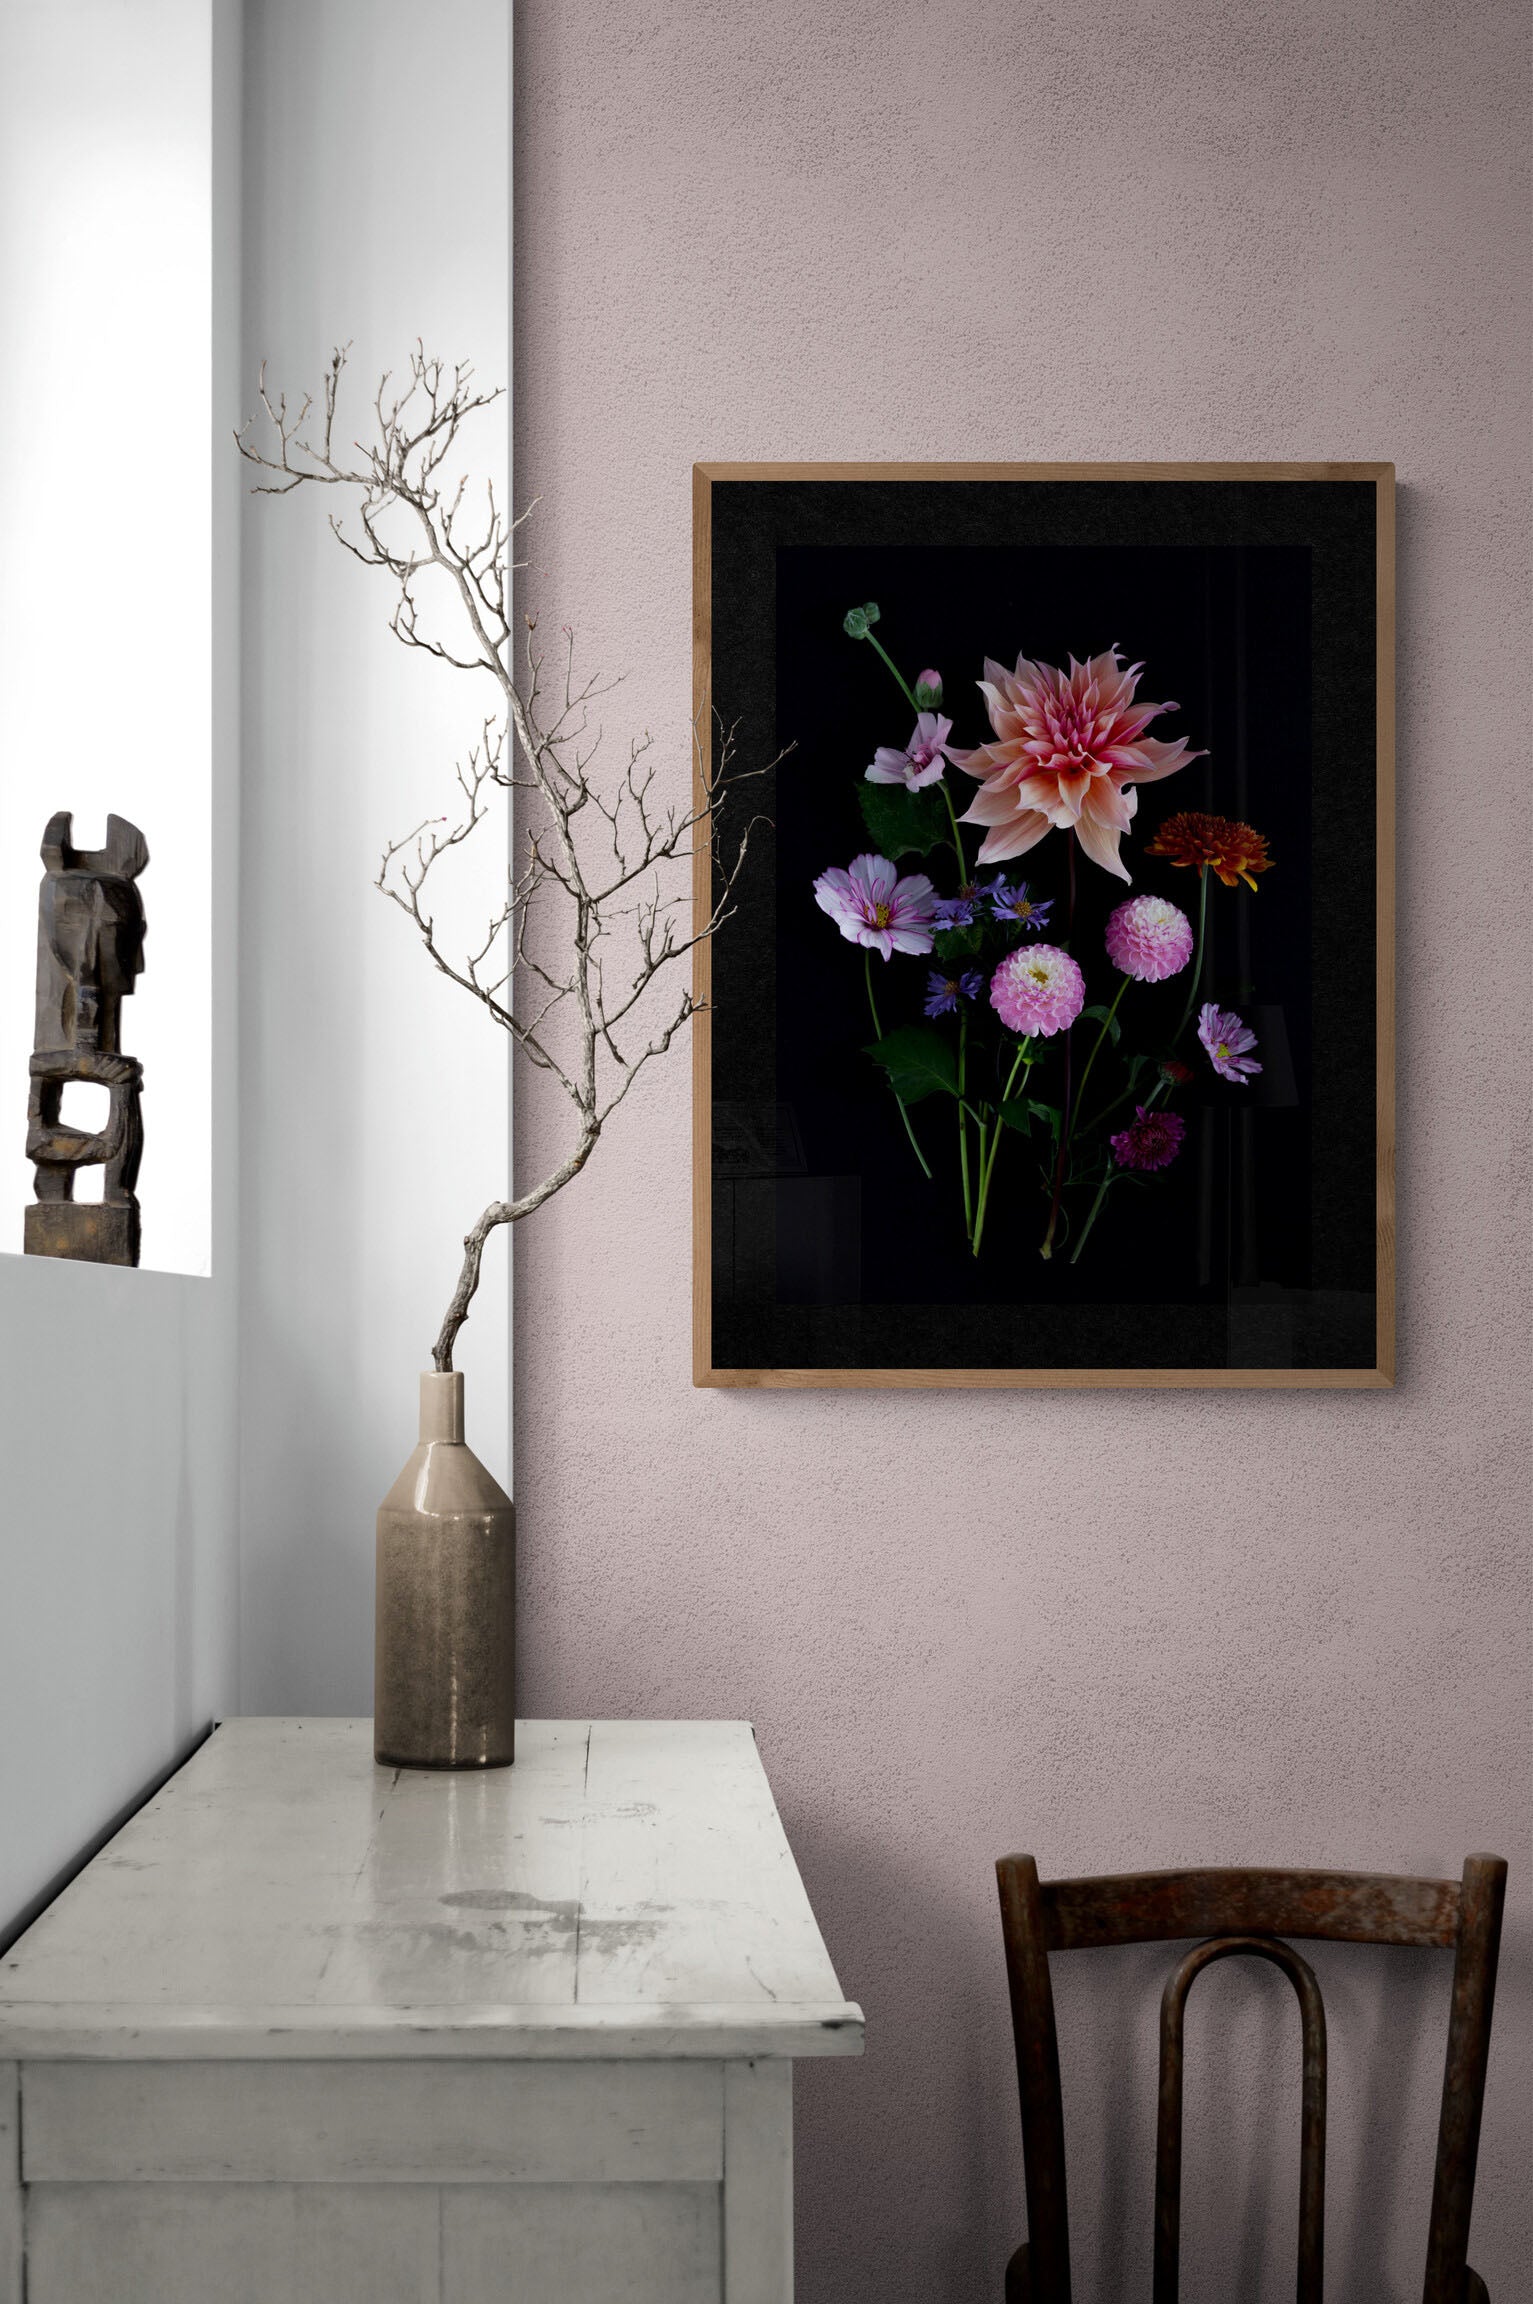 A framed dark botanical print of colourful Dahlias, Cosmos, Asters and Mallow on a black background, hung on a pale pink wall.